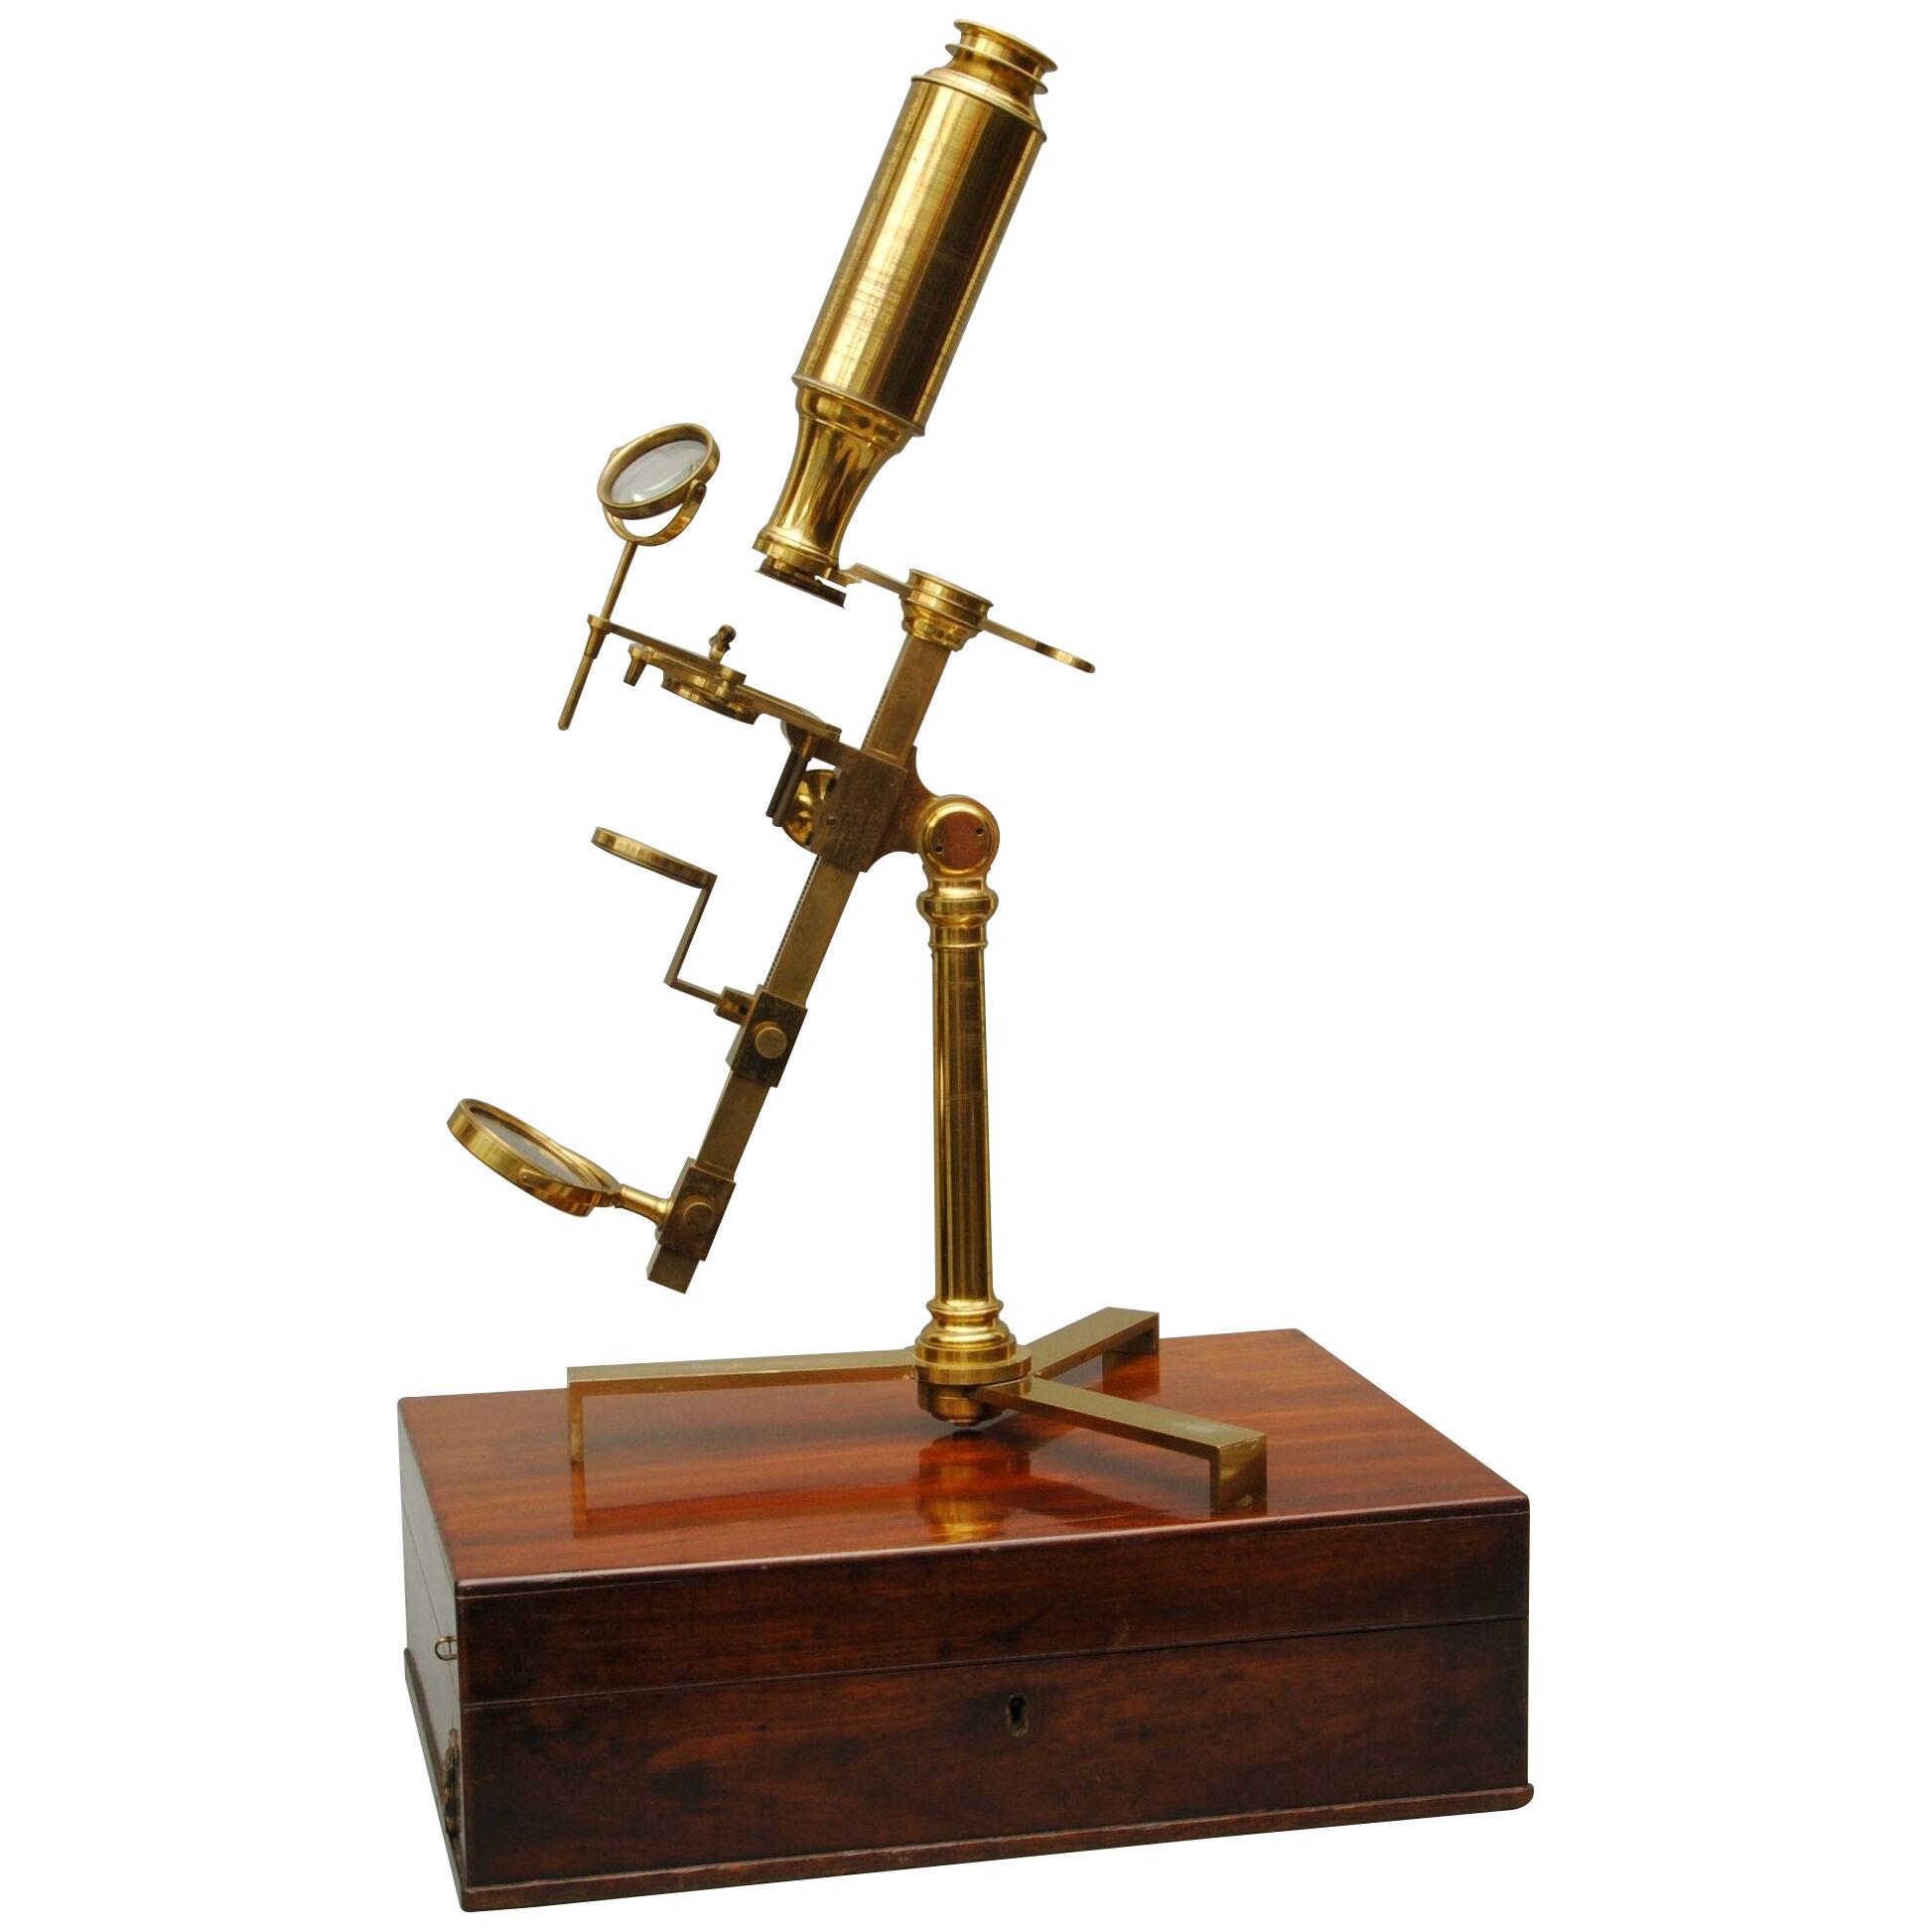 A FINE EXAMPLE OF A JONES MOST IMPROVED MICROSCOPE BY DOLLAND